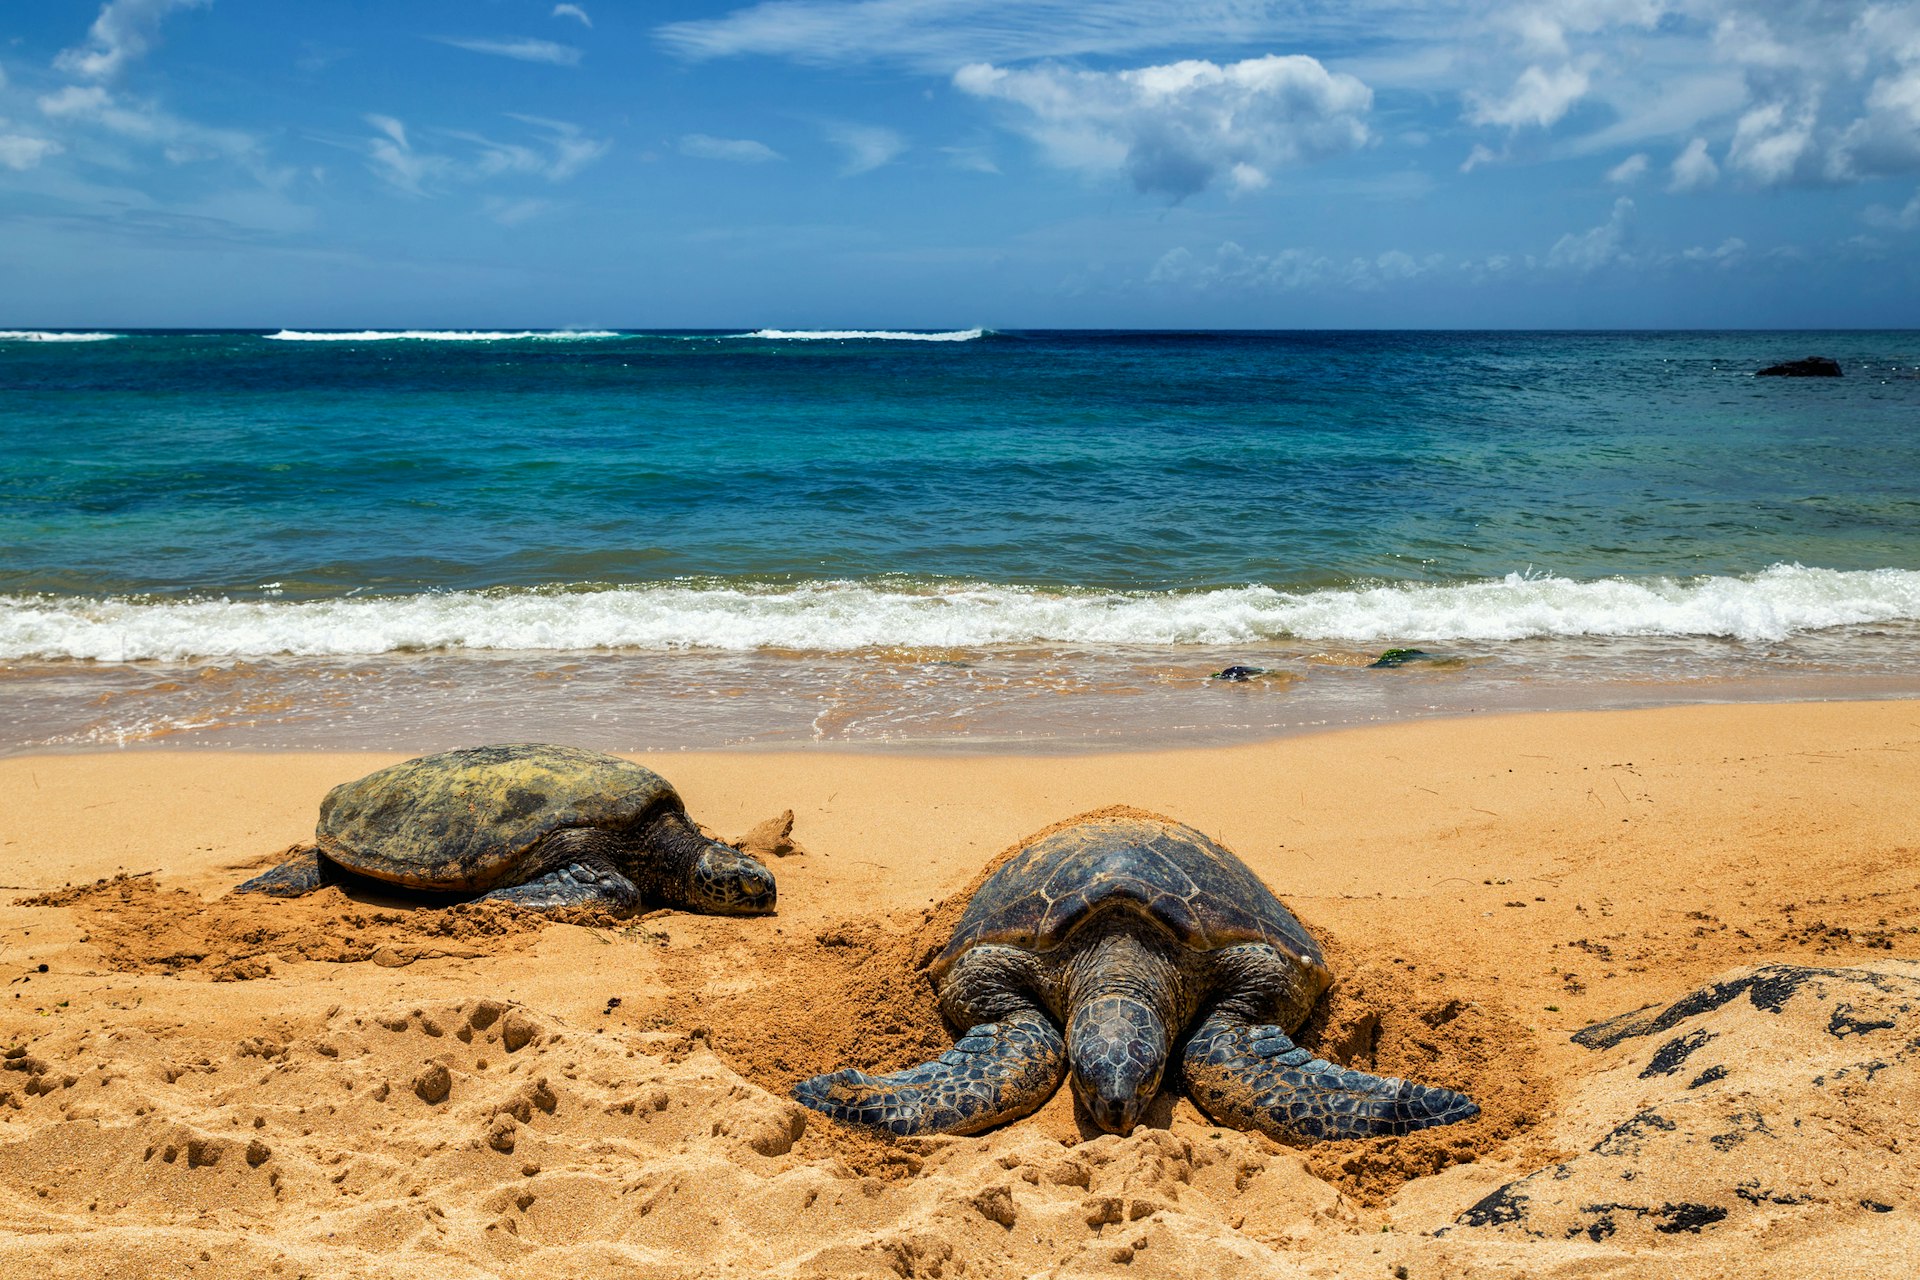 Two sea turtles resting on a sandy beach on a sunny day